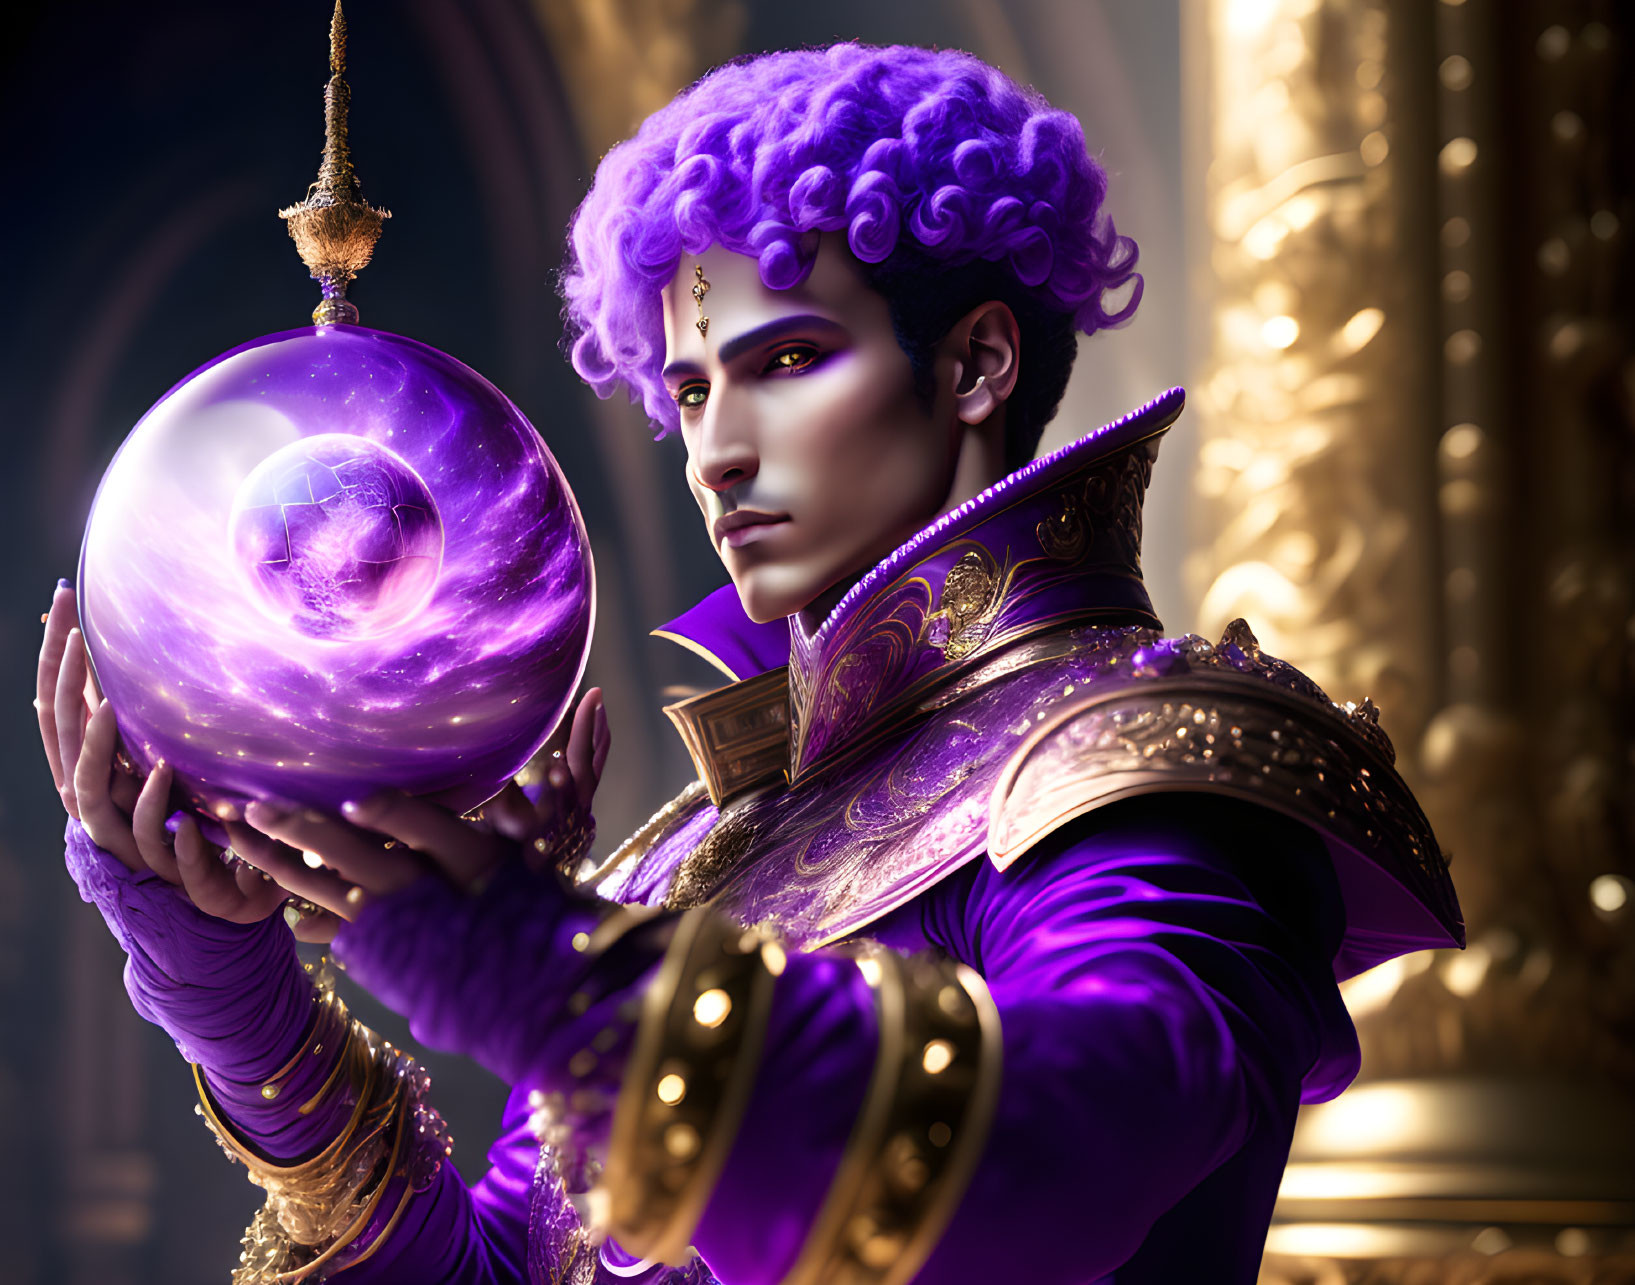 Purple-haired figure in golden armor with glowing orb amidst lavish decor